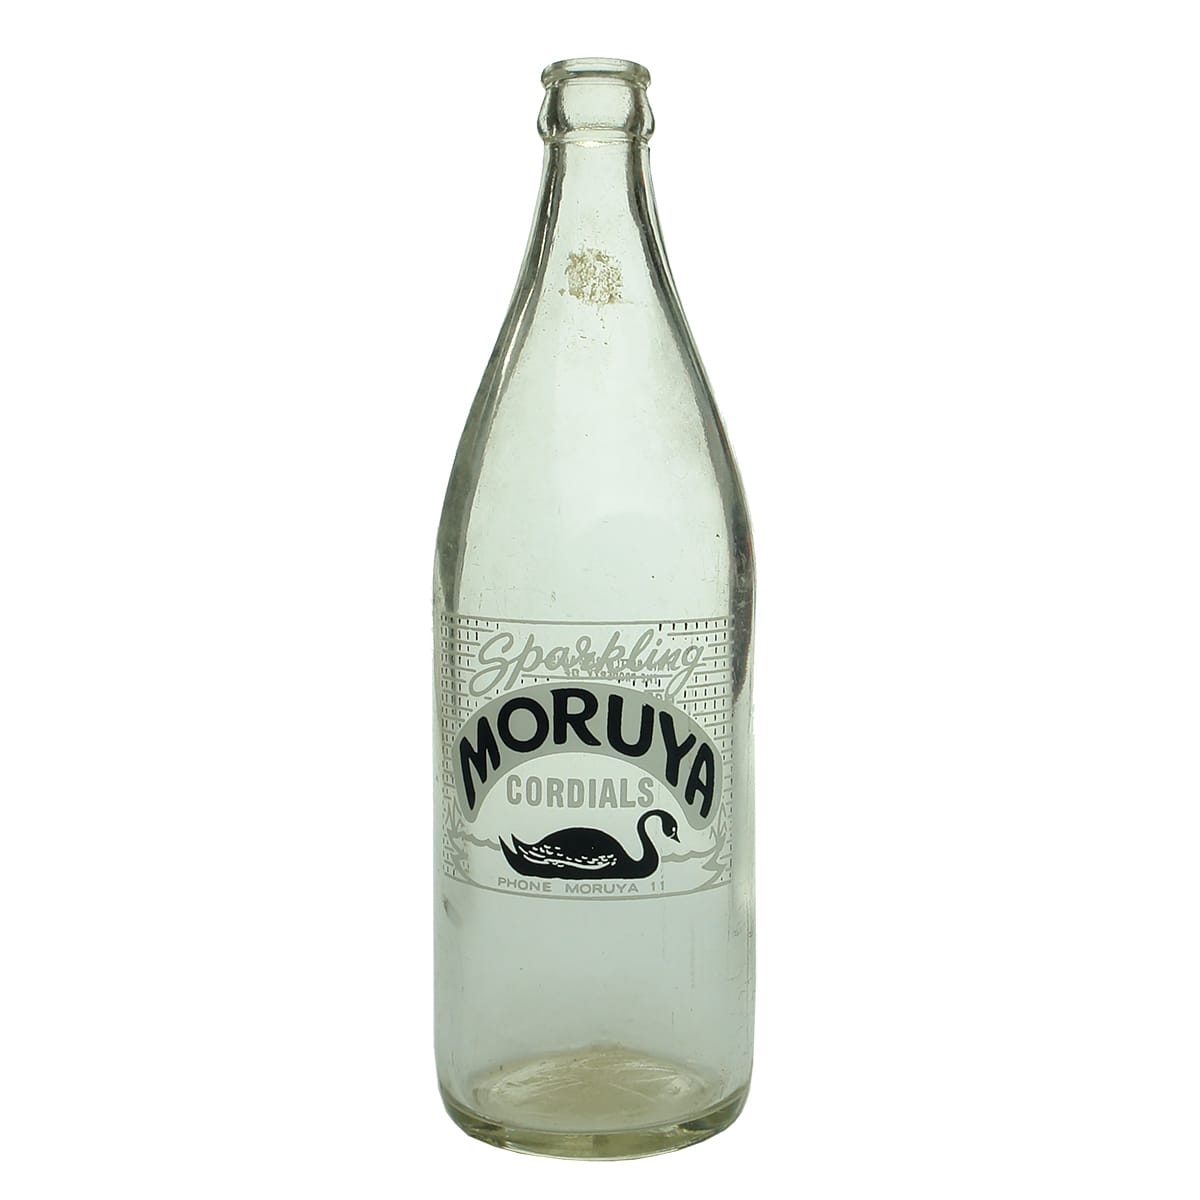 Crown Seal. Moruya Cordials. Ceramic Label. Clear. 24 oz. (New South Wales)